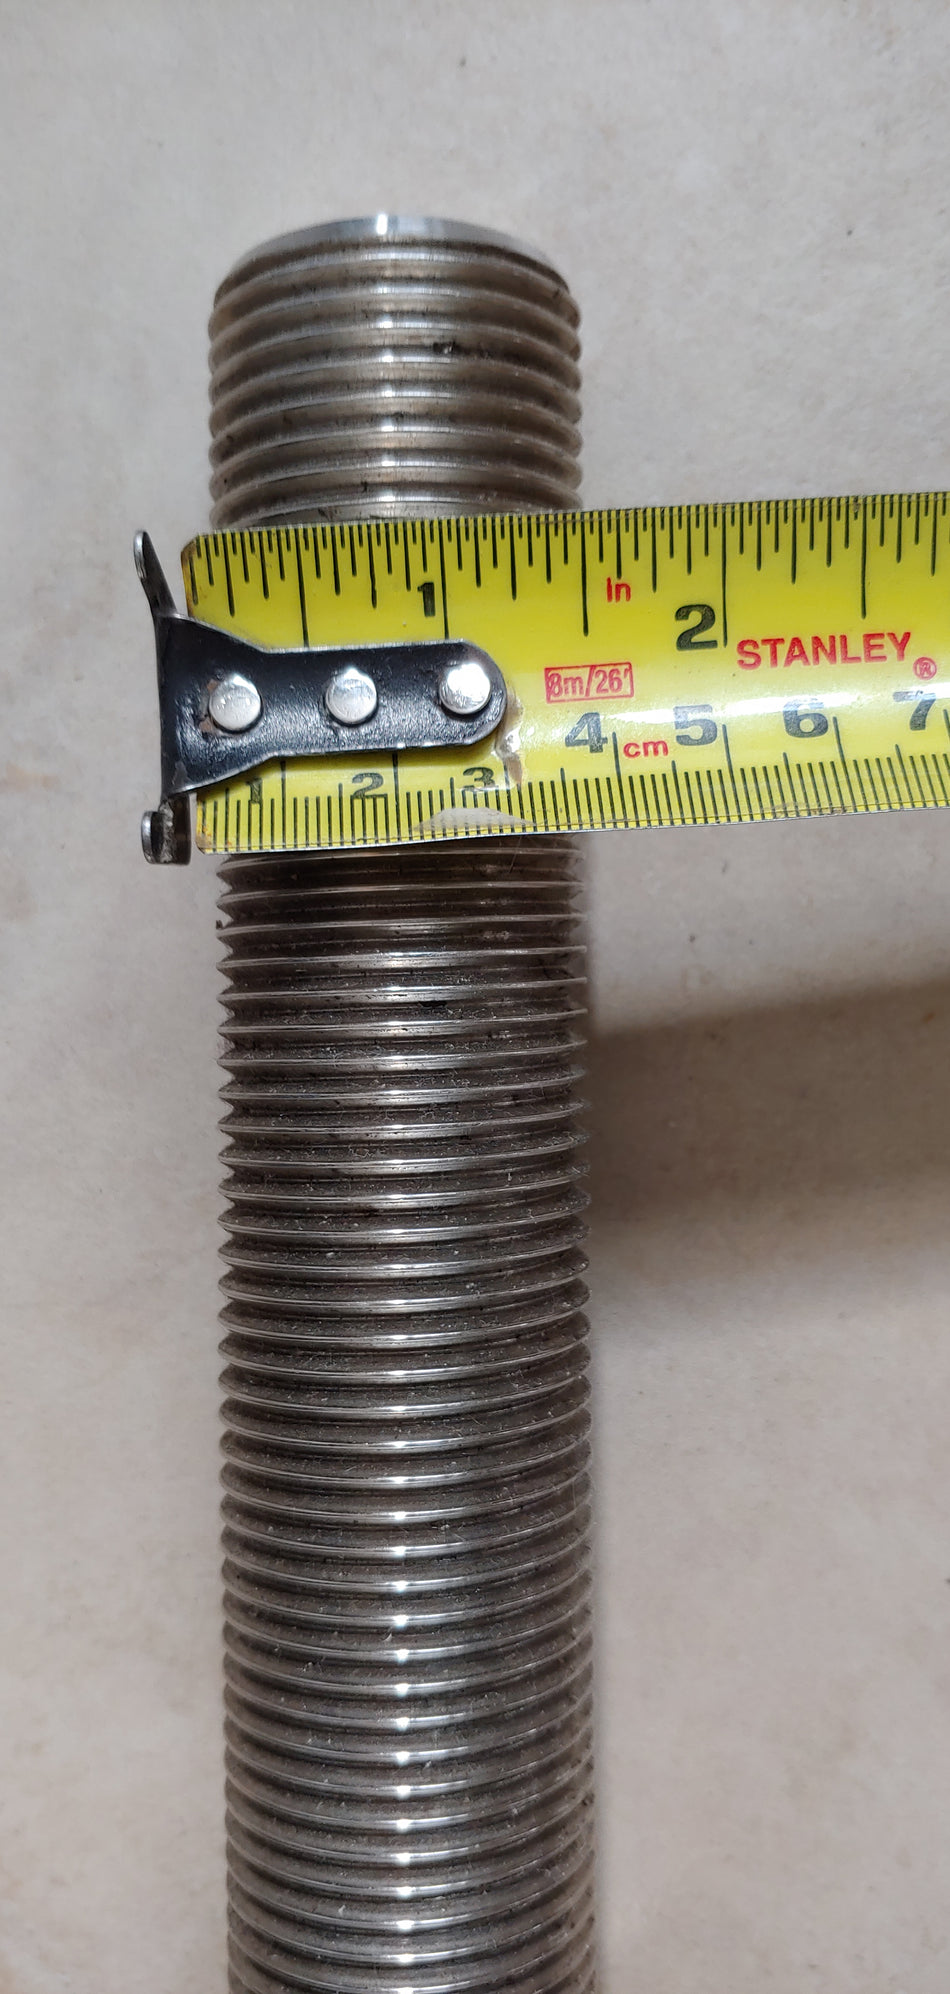 1-1/2” Dia x 9" Stainless Steel studs and nuts